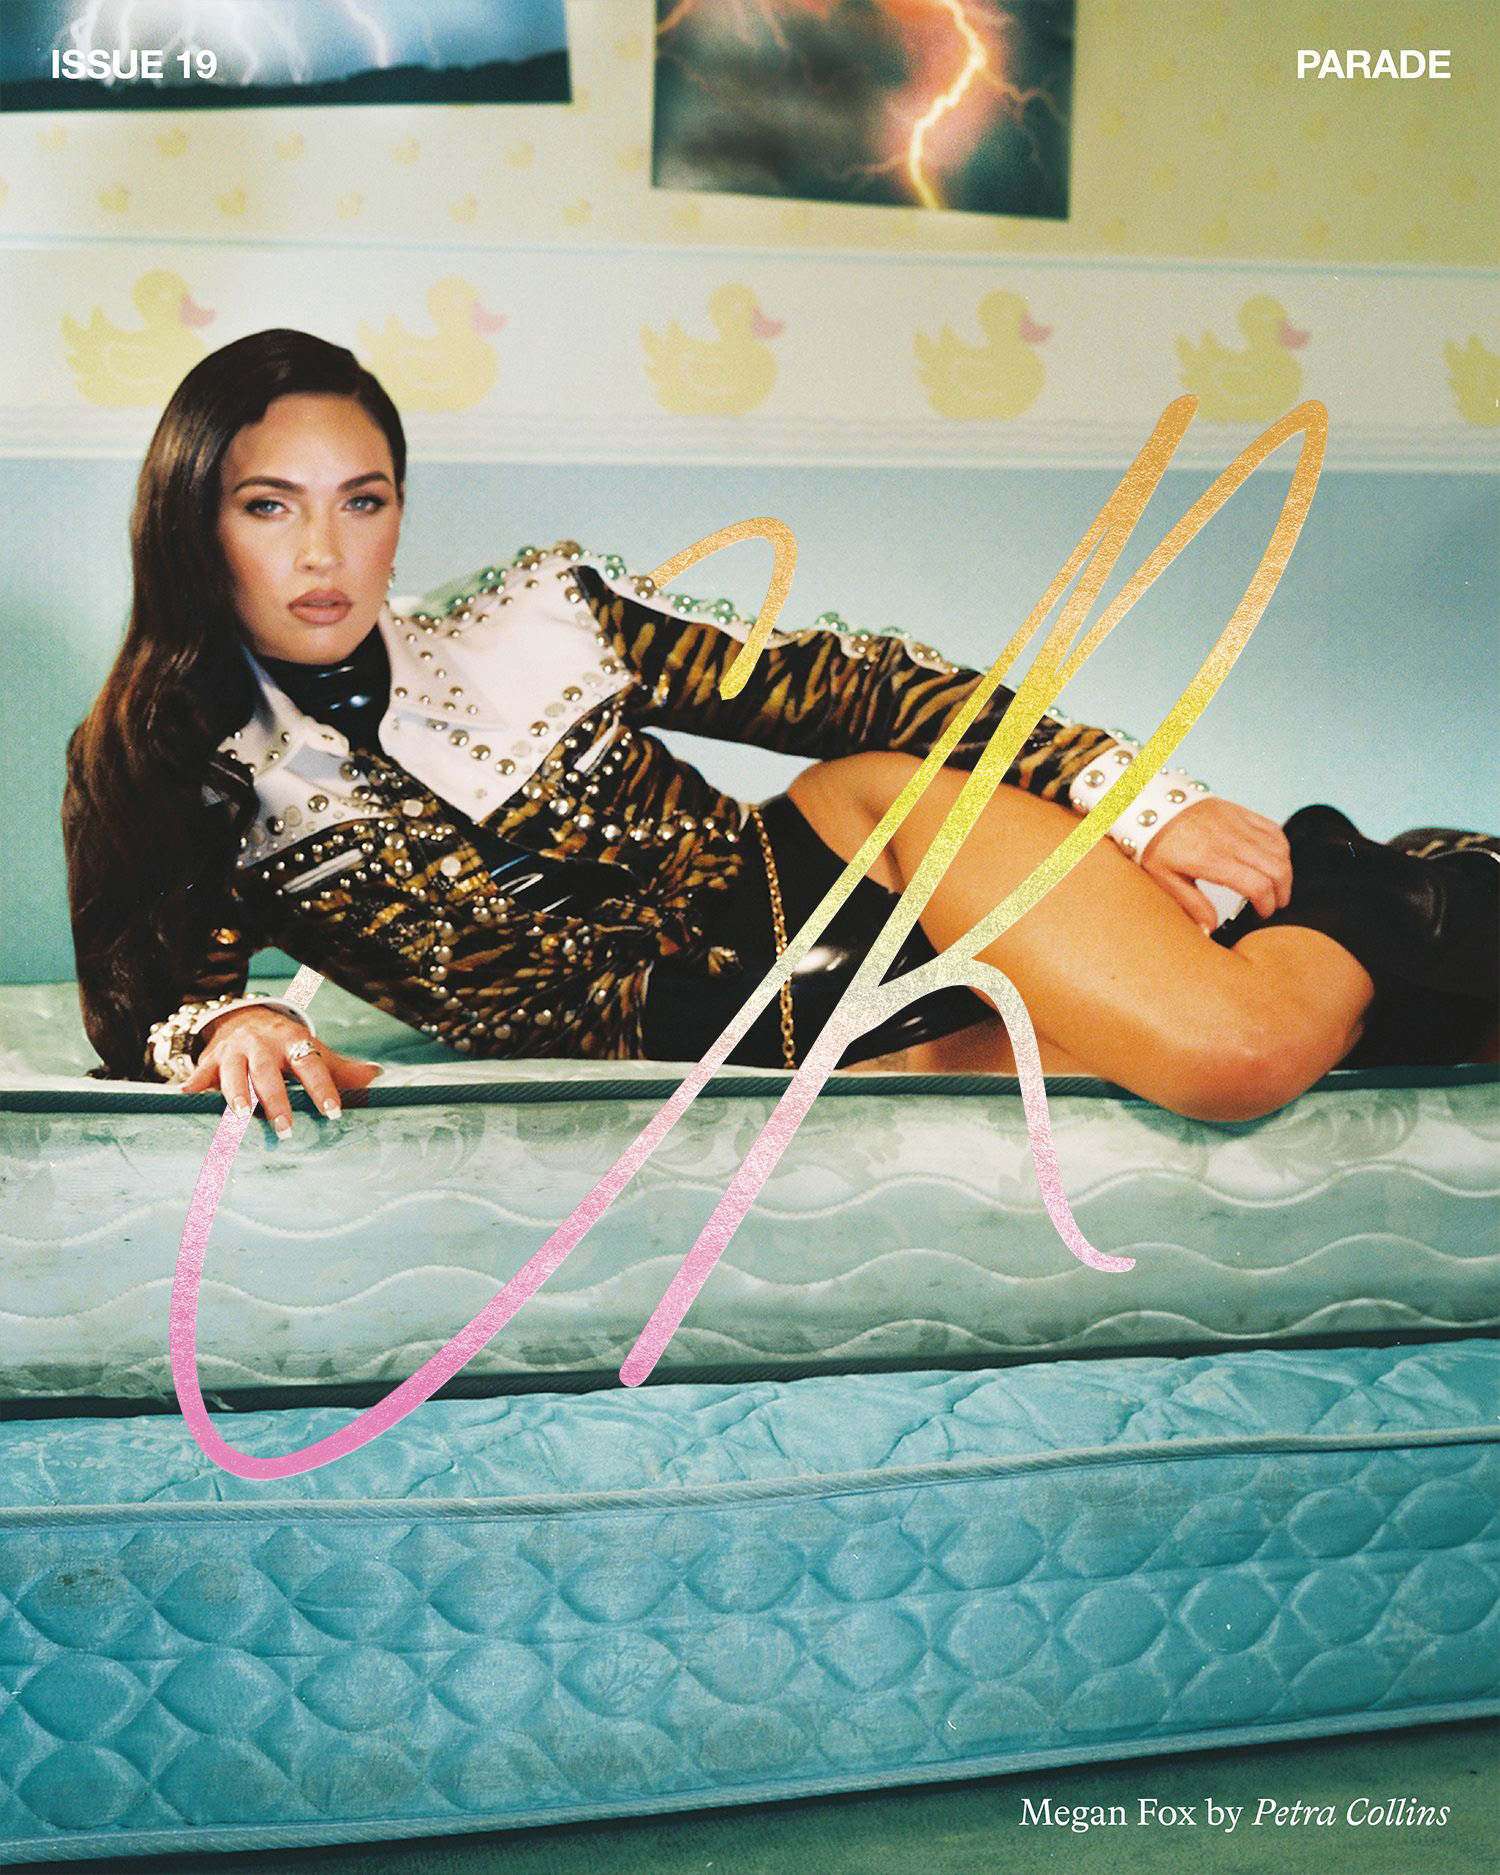 Megan Fox covers CR Fashion Book Issue 19 by Petra Collins